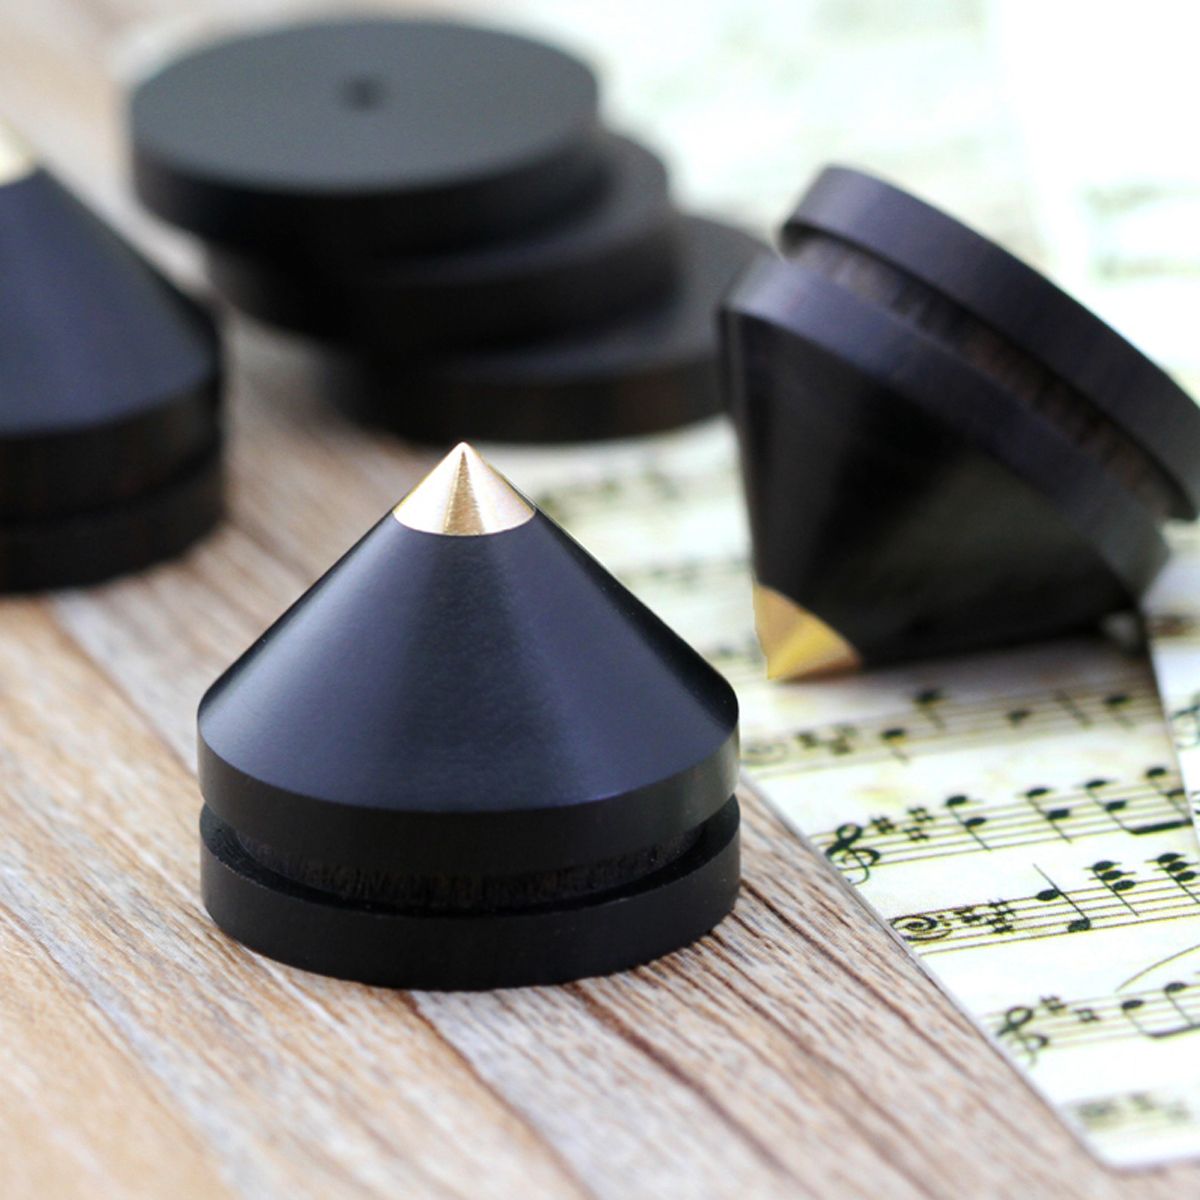 4Pcs-Ebony-Speaker-Spike-Isolation-Stand-Wooden-Copper-Tip-Feet-Spike-with-23mm-Base-Pad-1390545